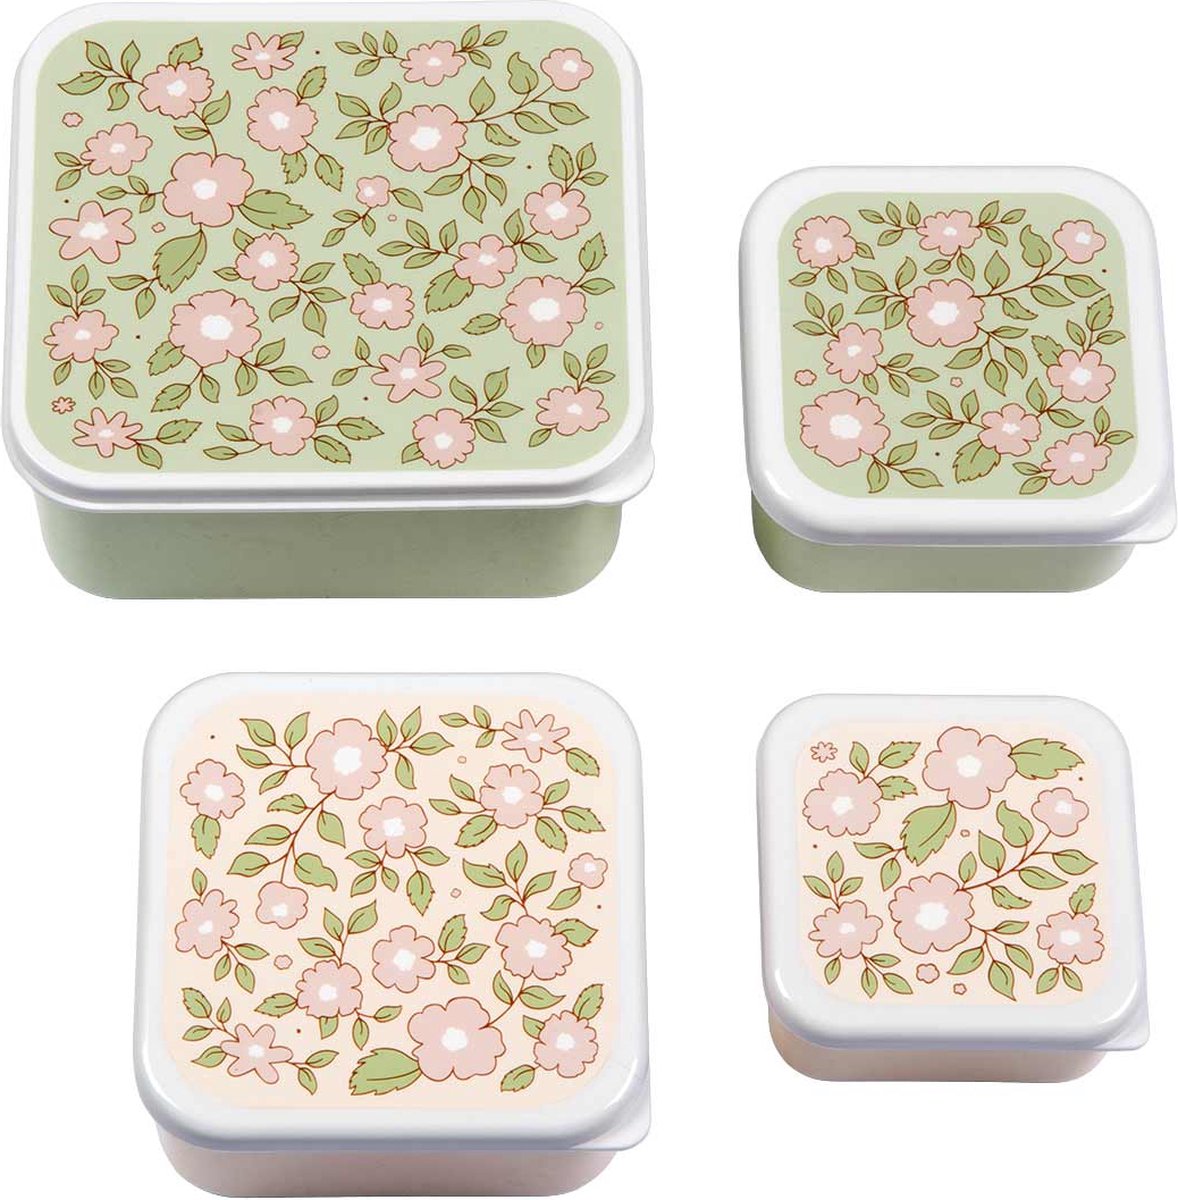 A Little Lovely Company - Brooddoos - Broodtrommel - Lunch & snack box set van 4 - Bloesems - A Little Lovely Company